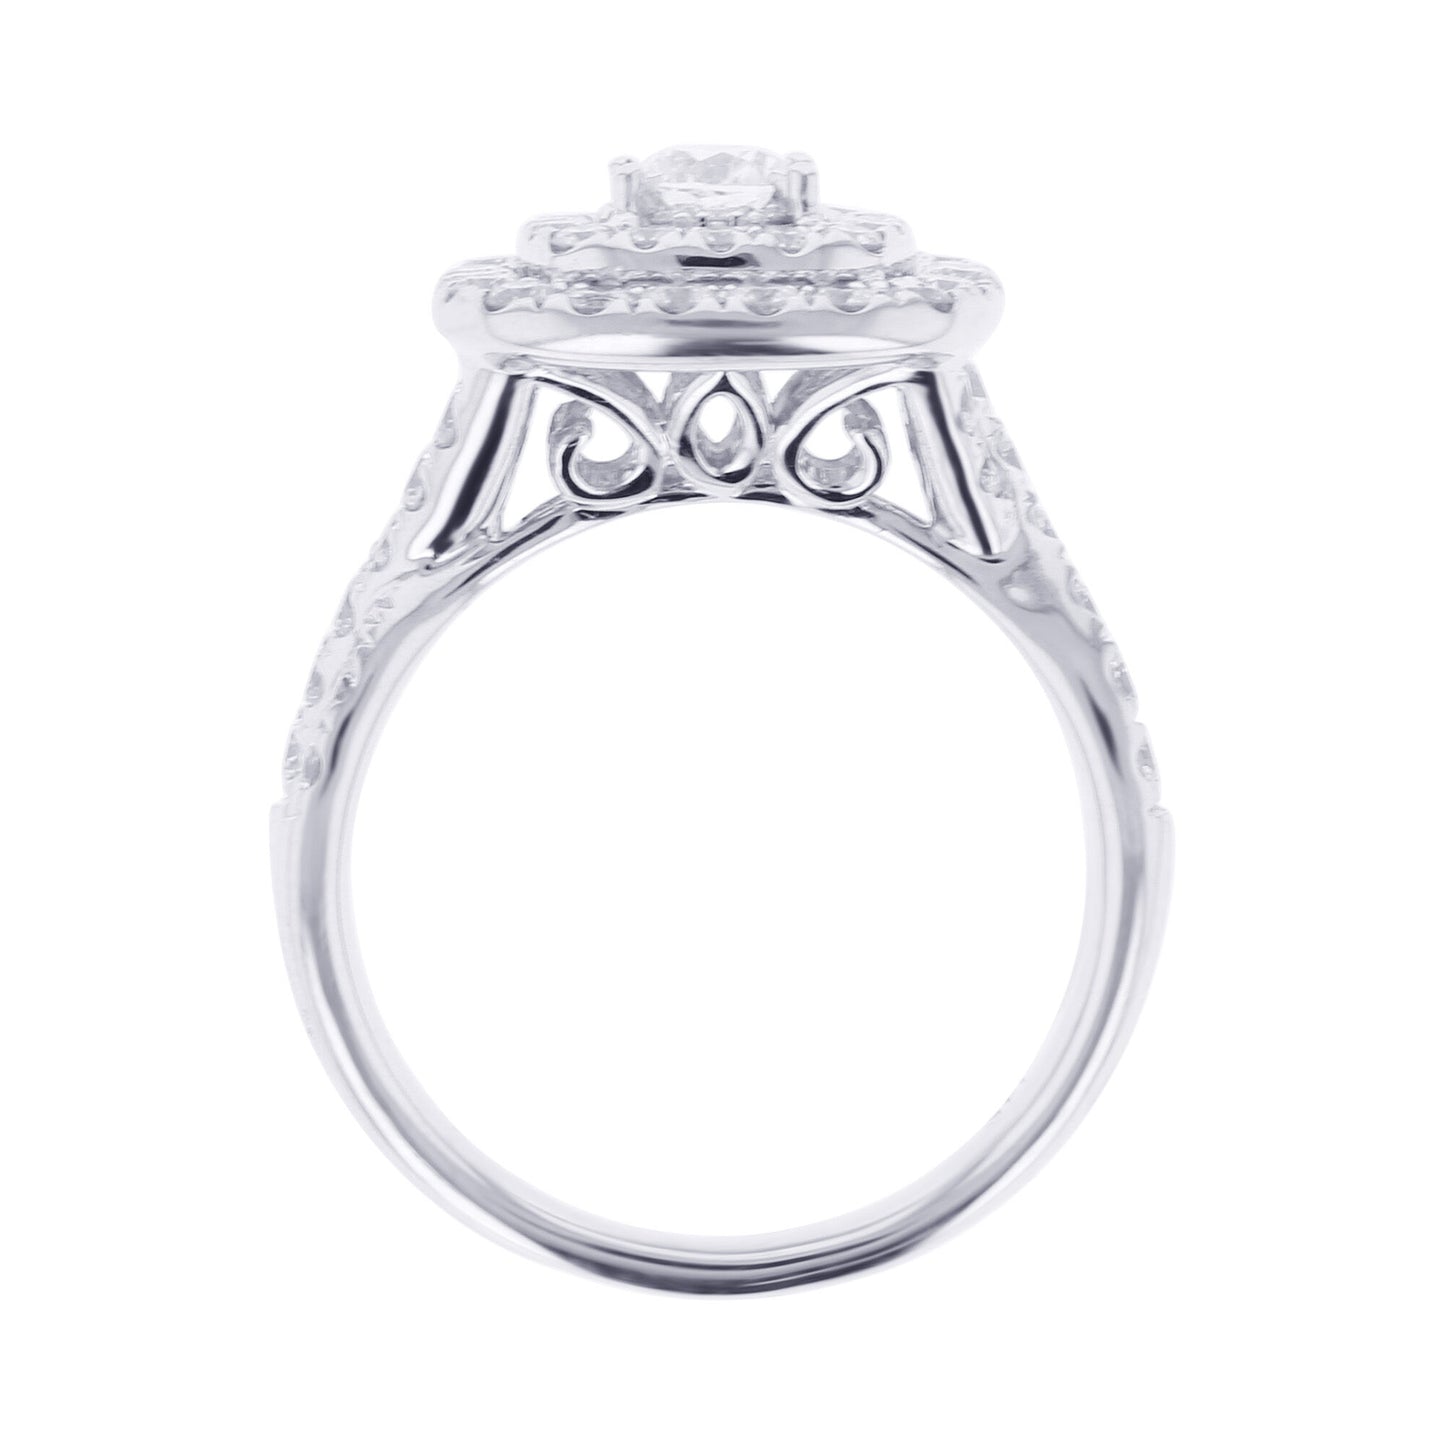 Ollie Double Cushion Halo Infinity Ready for Love Diamond Engagement Ring